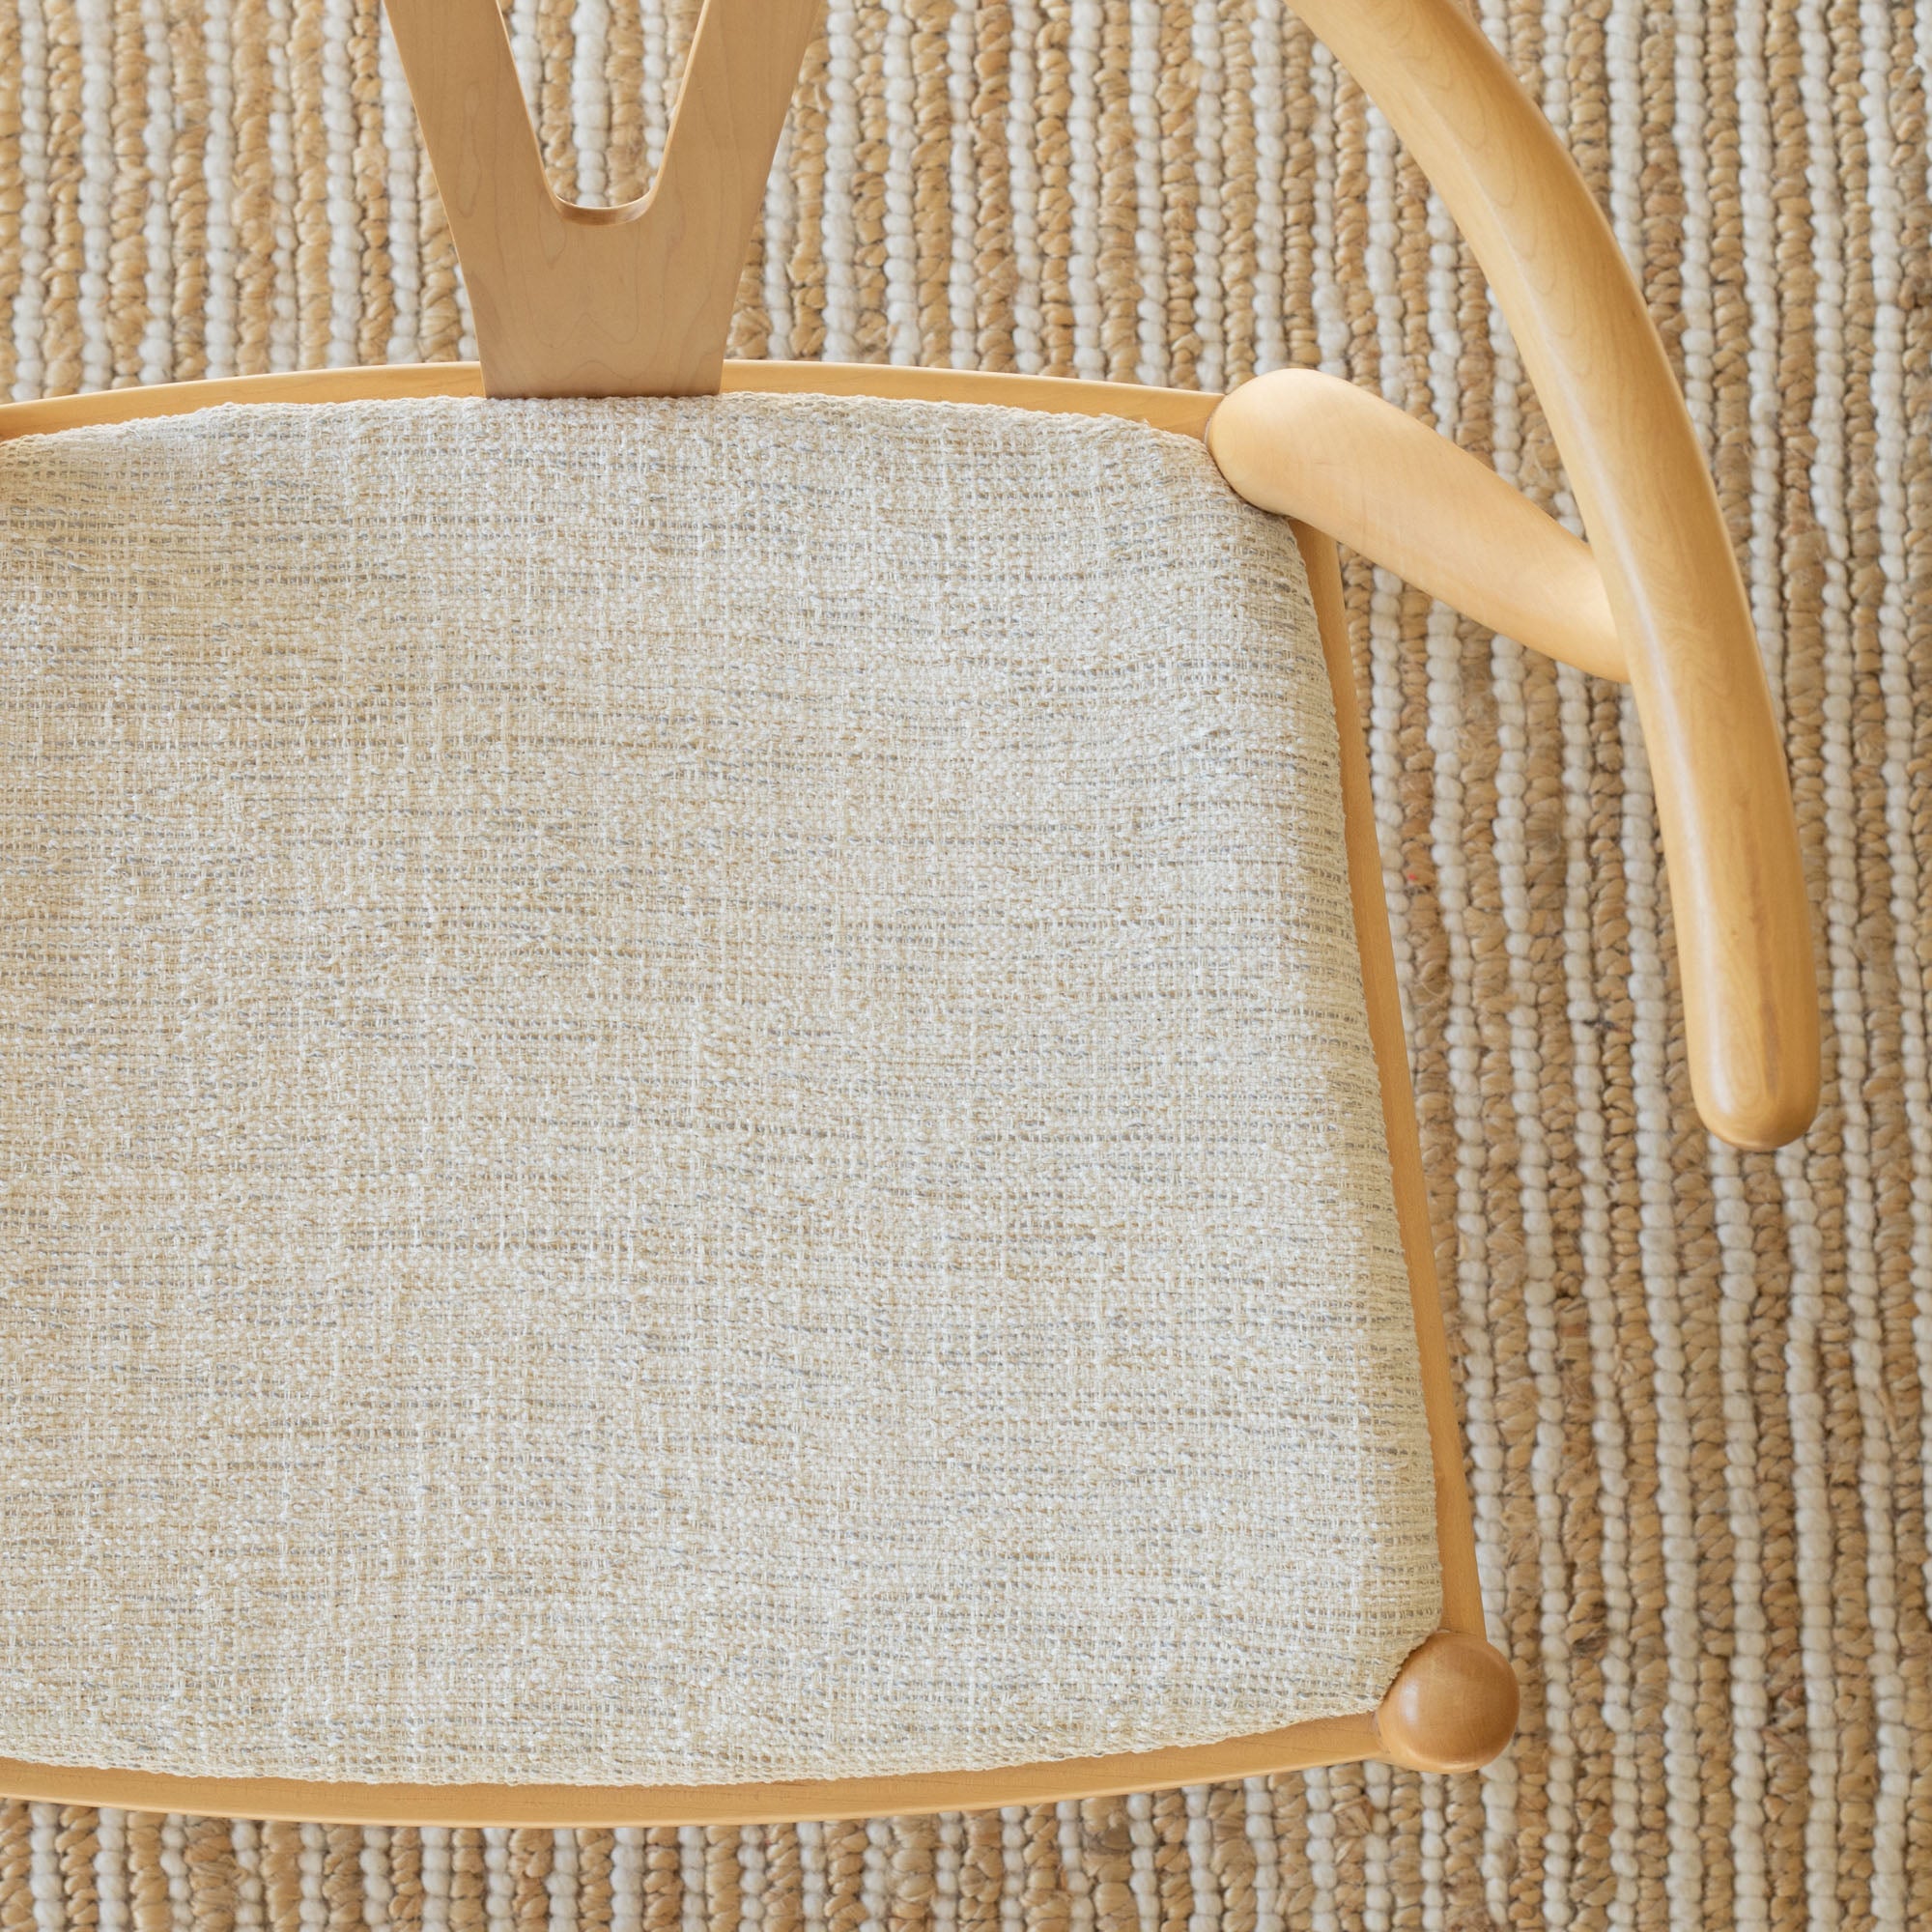 a sandy beige upholstered chair seat